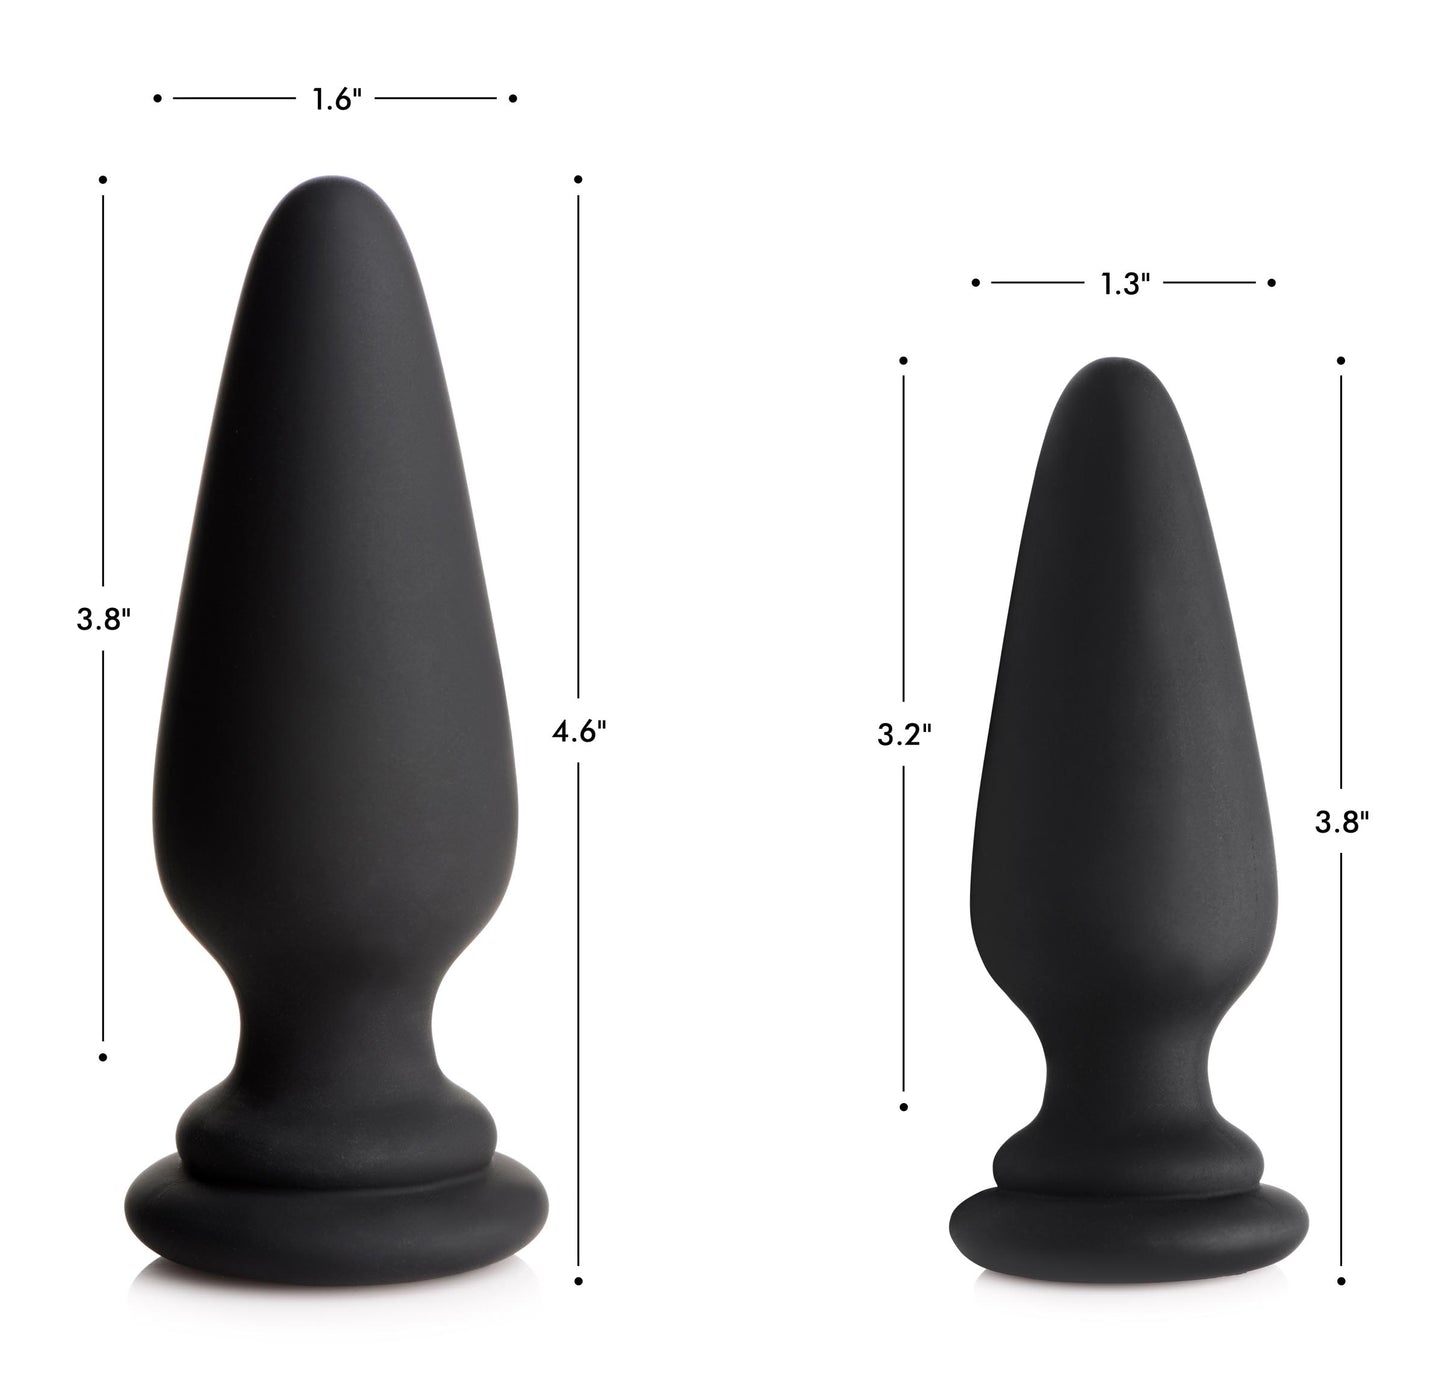 Small Anal Plug with Interchangeable Fox Tail - White - UABDSM